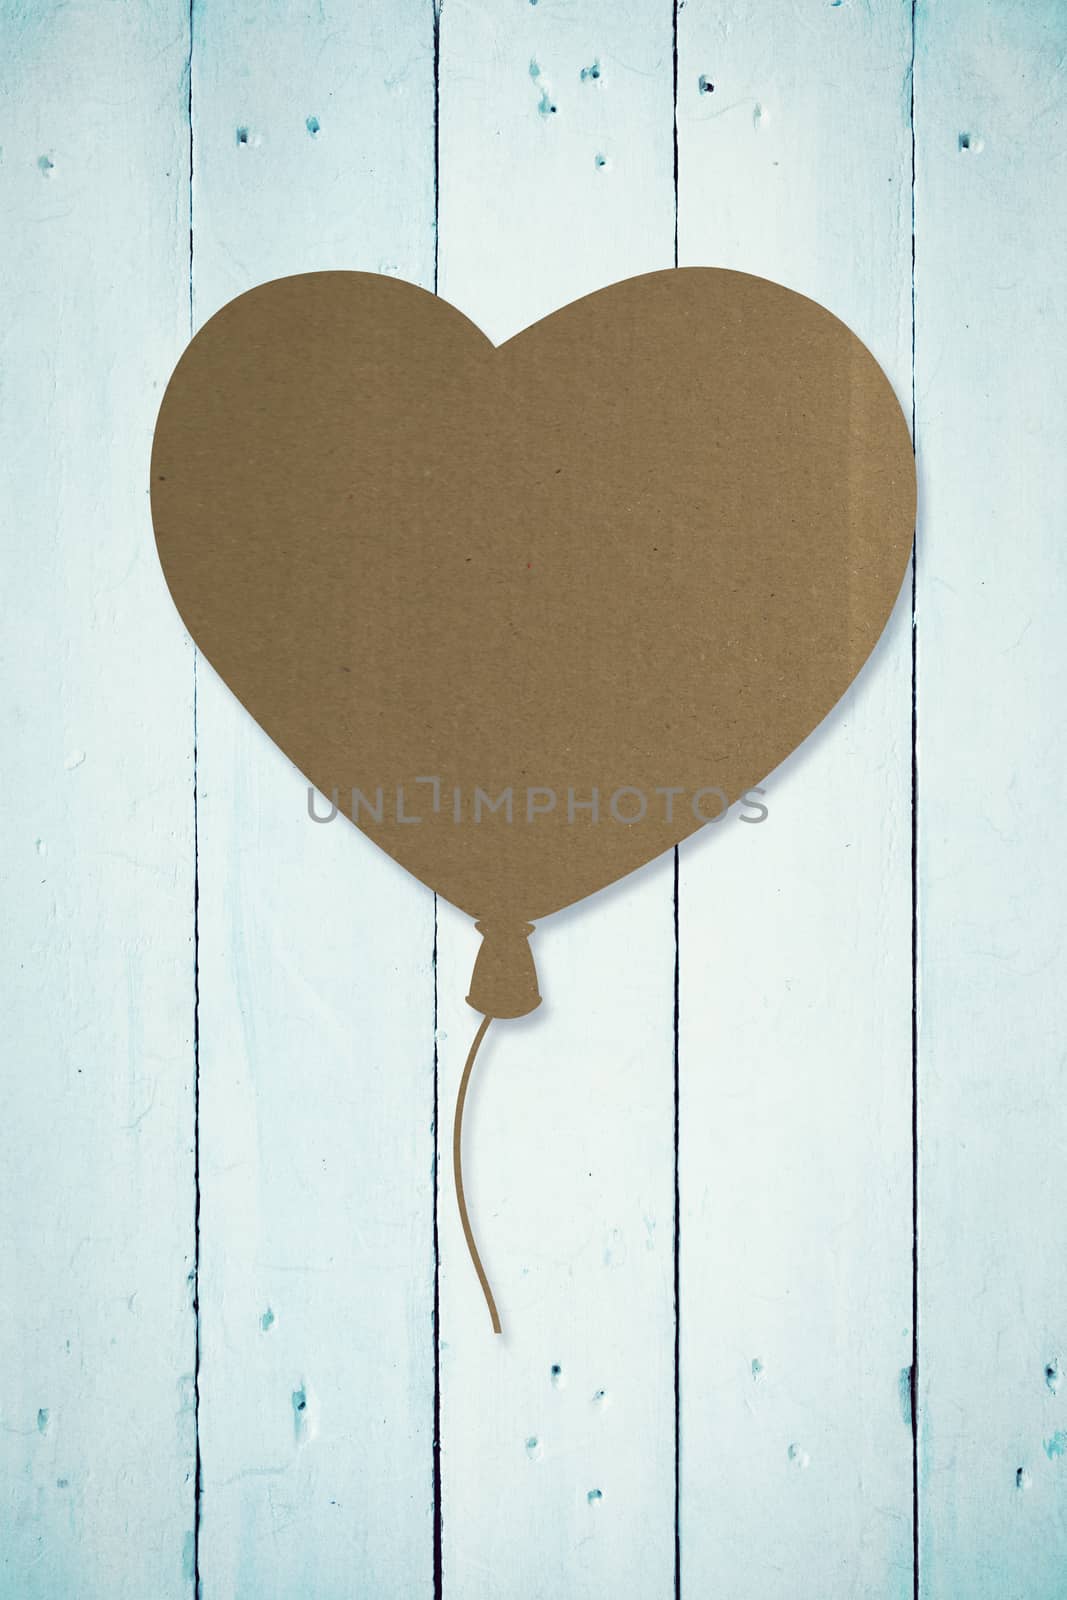 Composite image of heart balloon by Wavebreakmedia